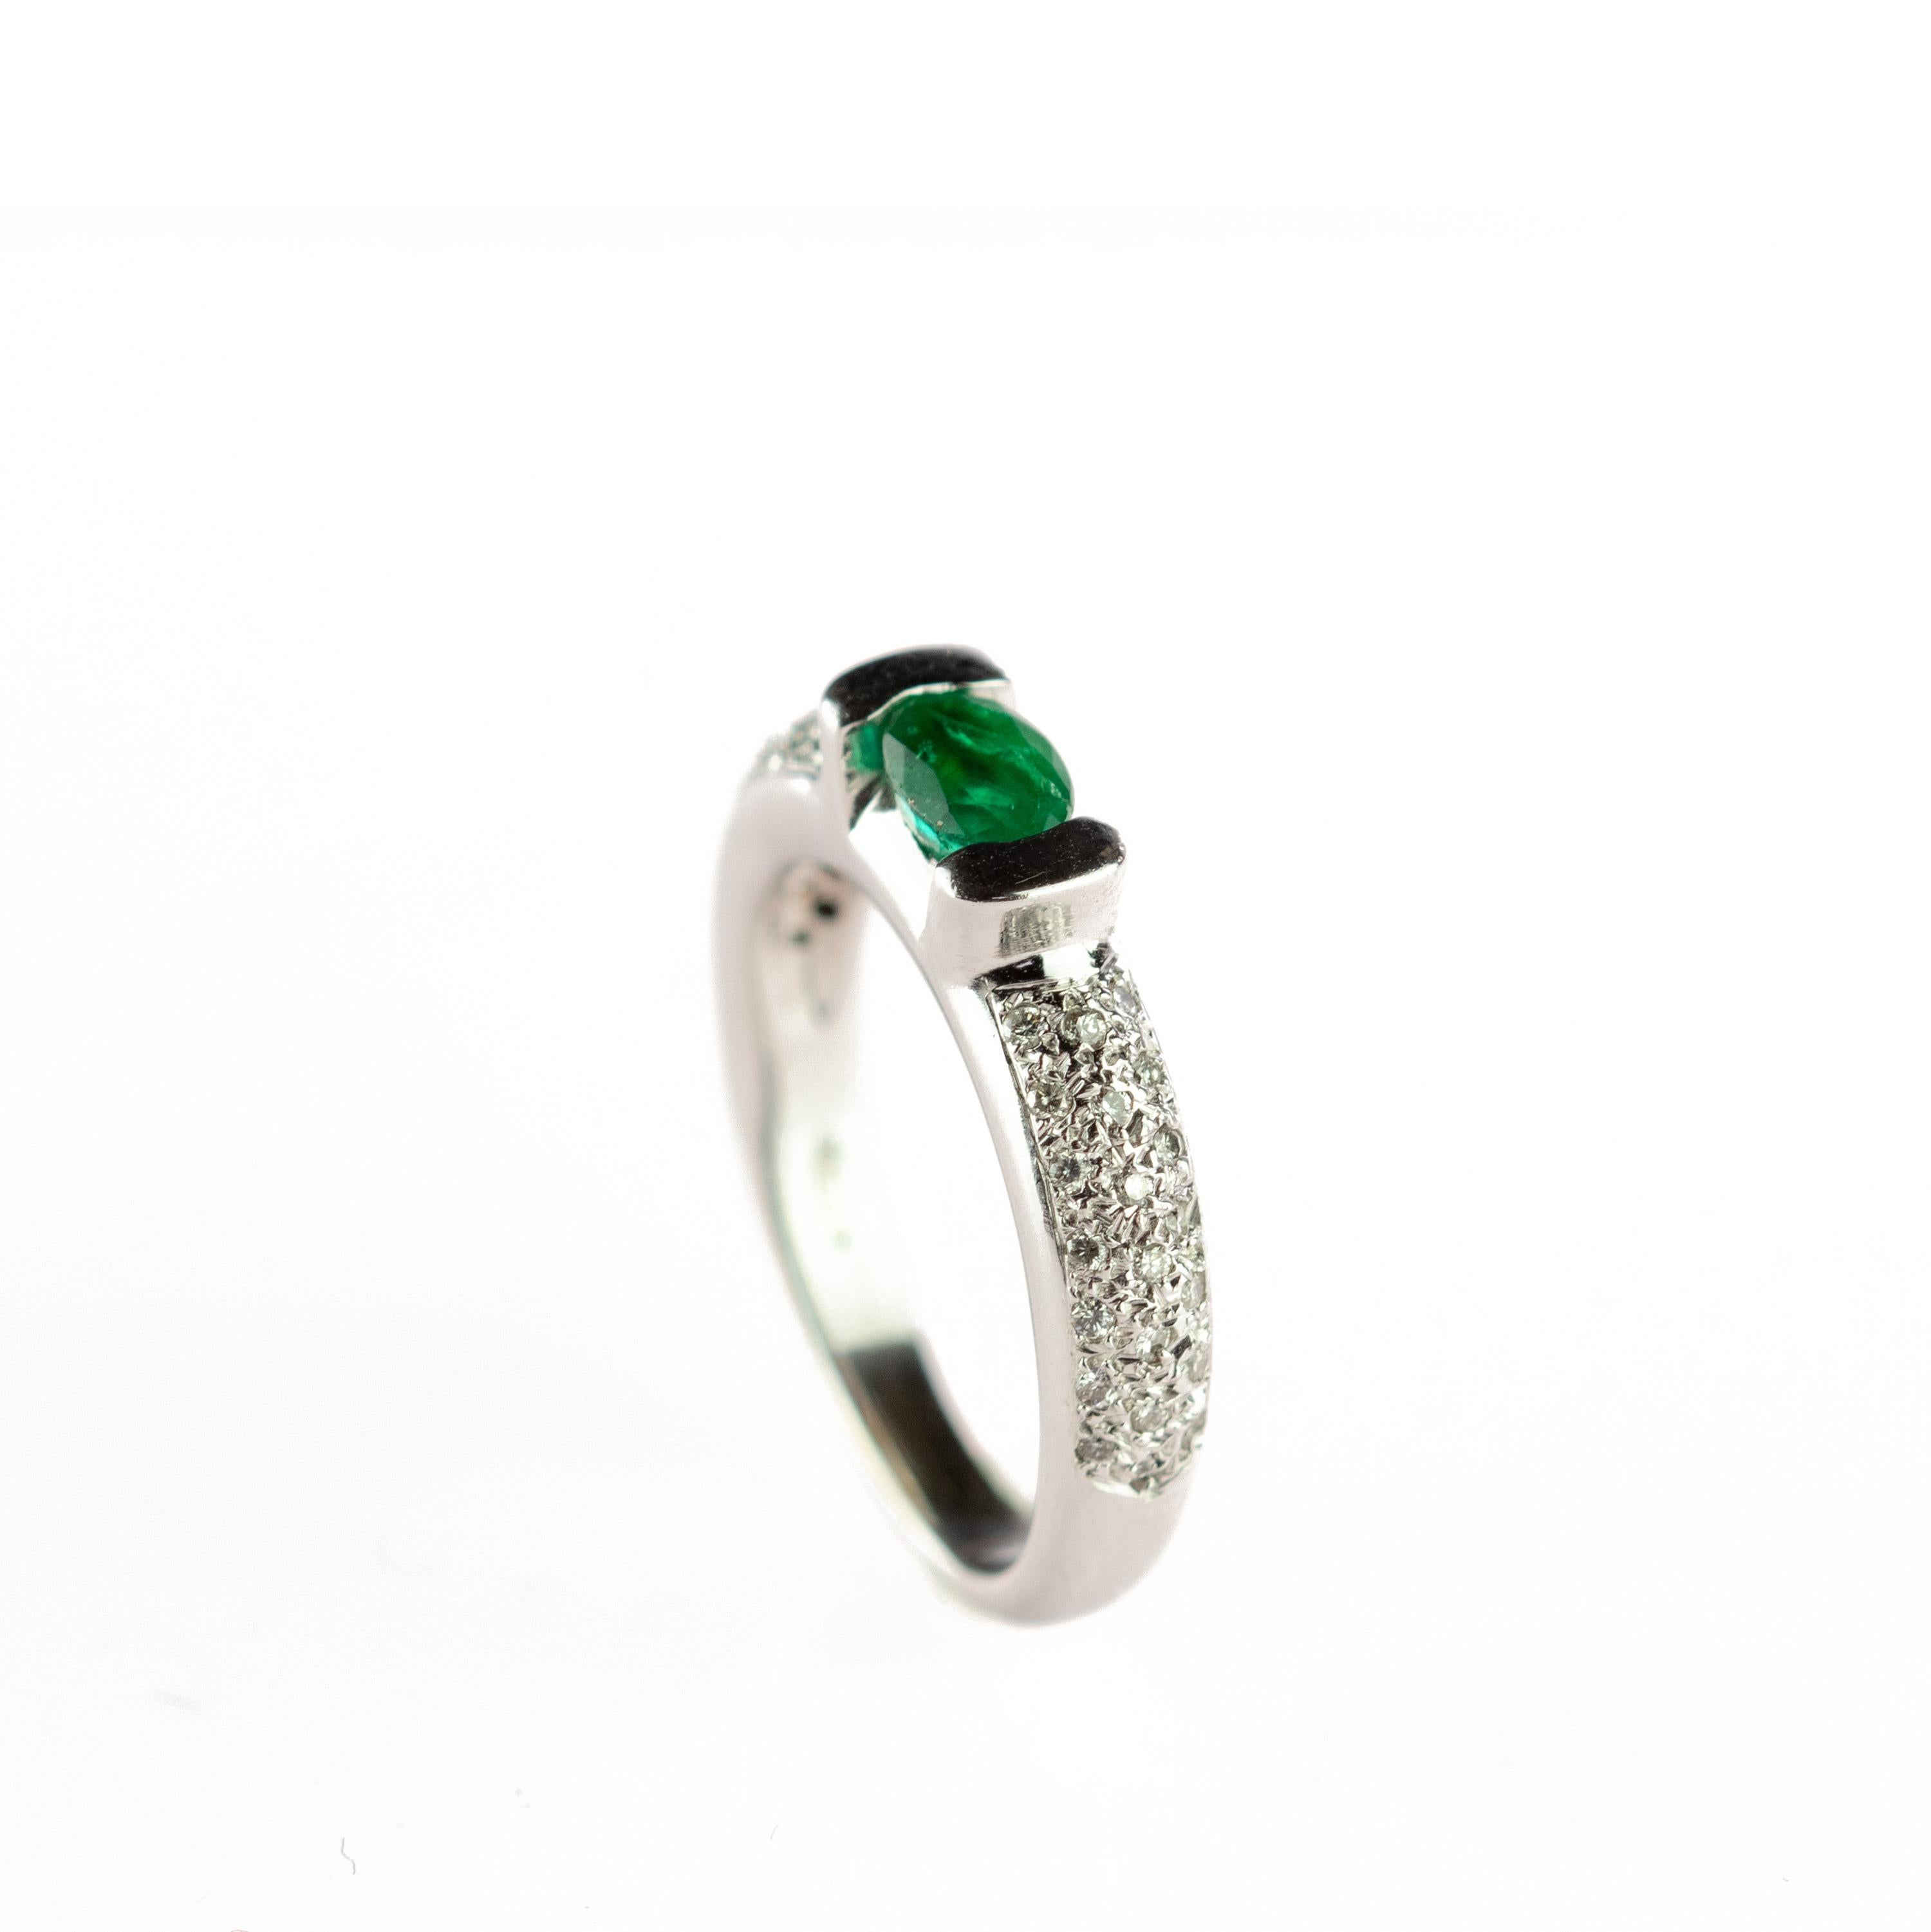 Amazing and stunning emerald stone with a brilliant cut that is surrounded by 18 karat white gold. Embellished by numerous diamonds that create an elegant cocktail jewel piece enhanced by a solitaire look in a unique way. 
 
This ring is inspired by